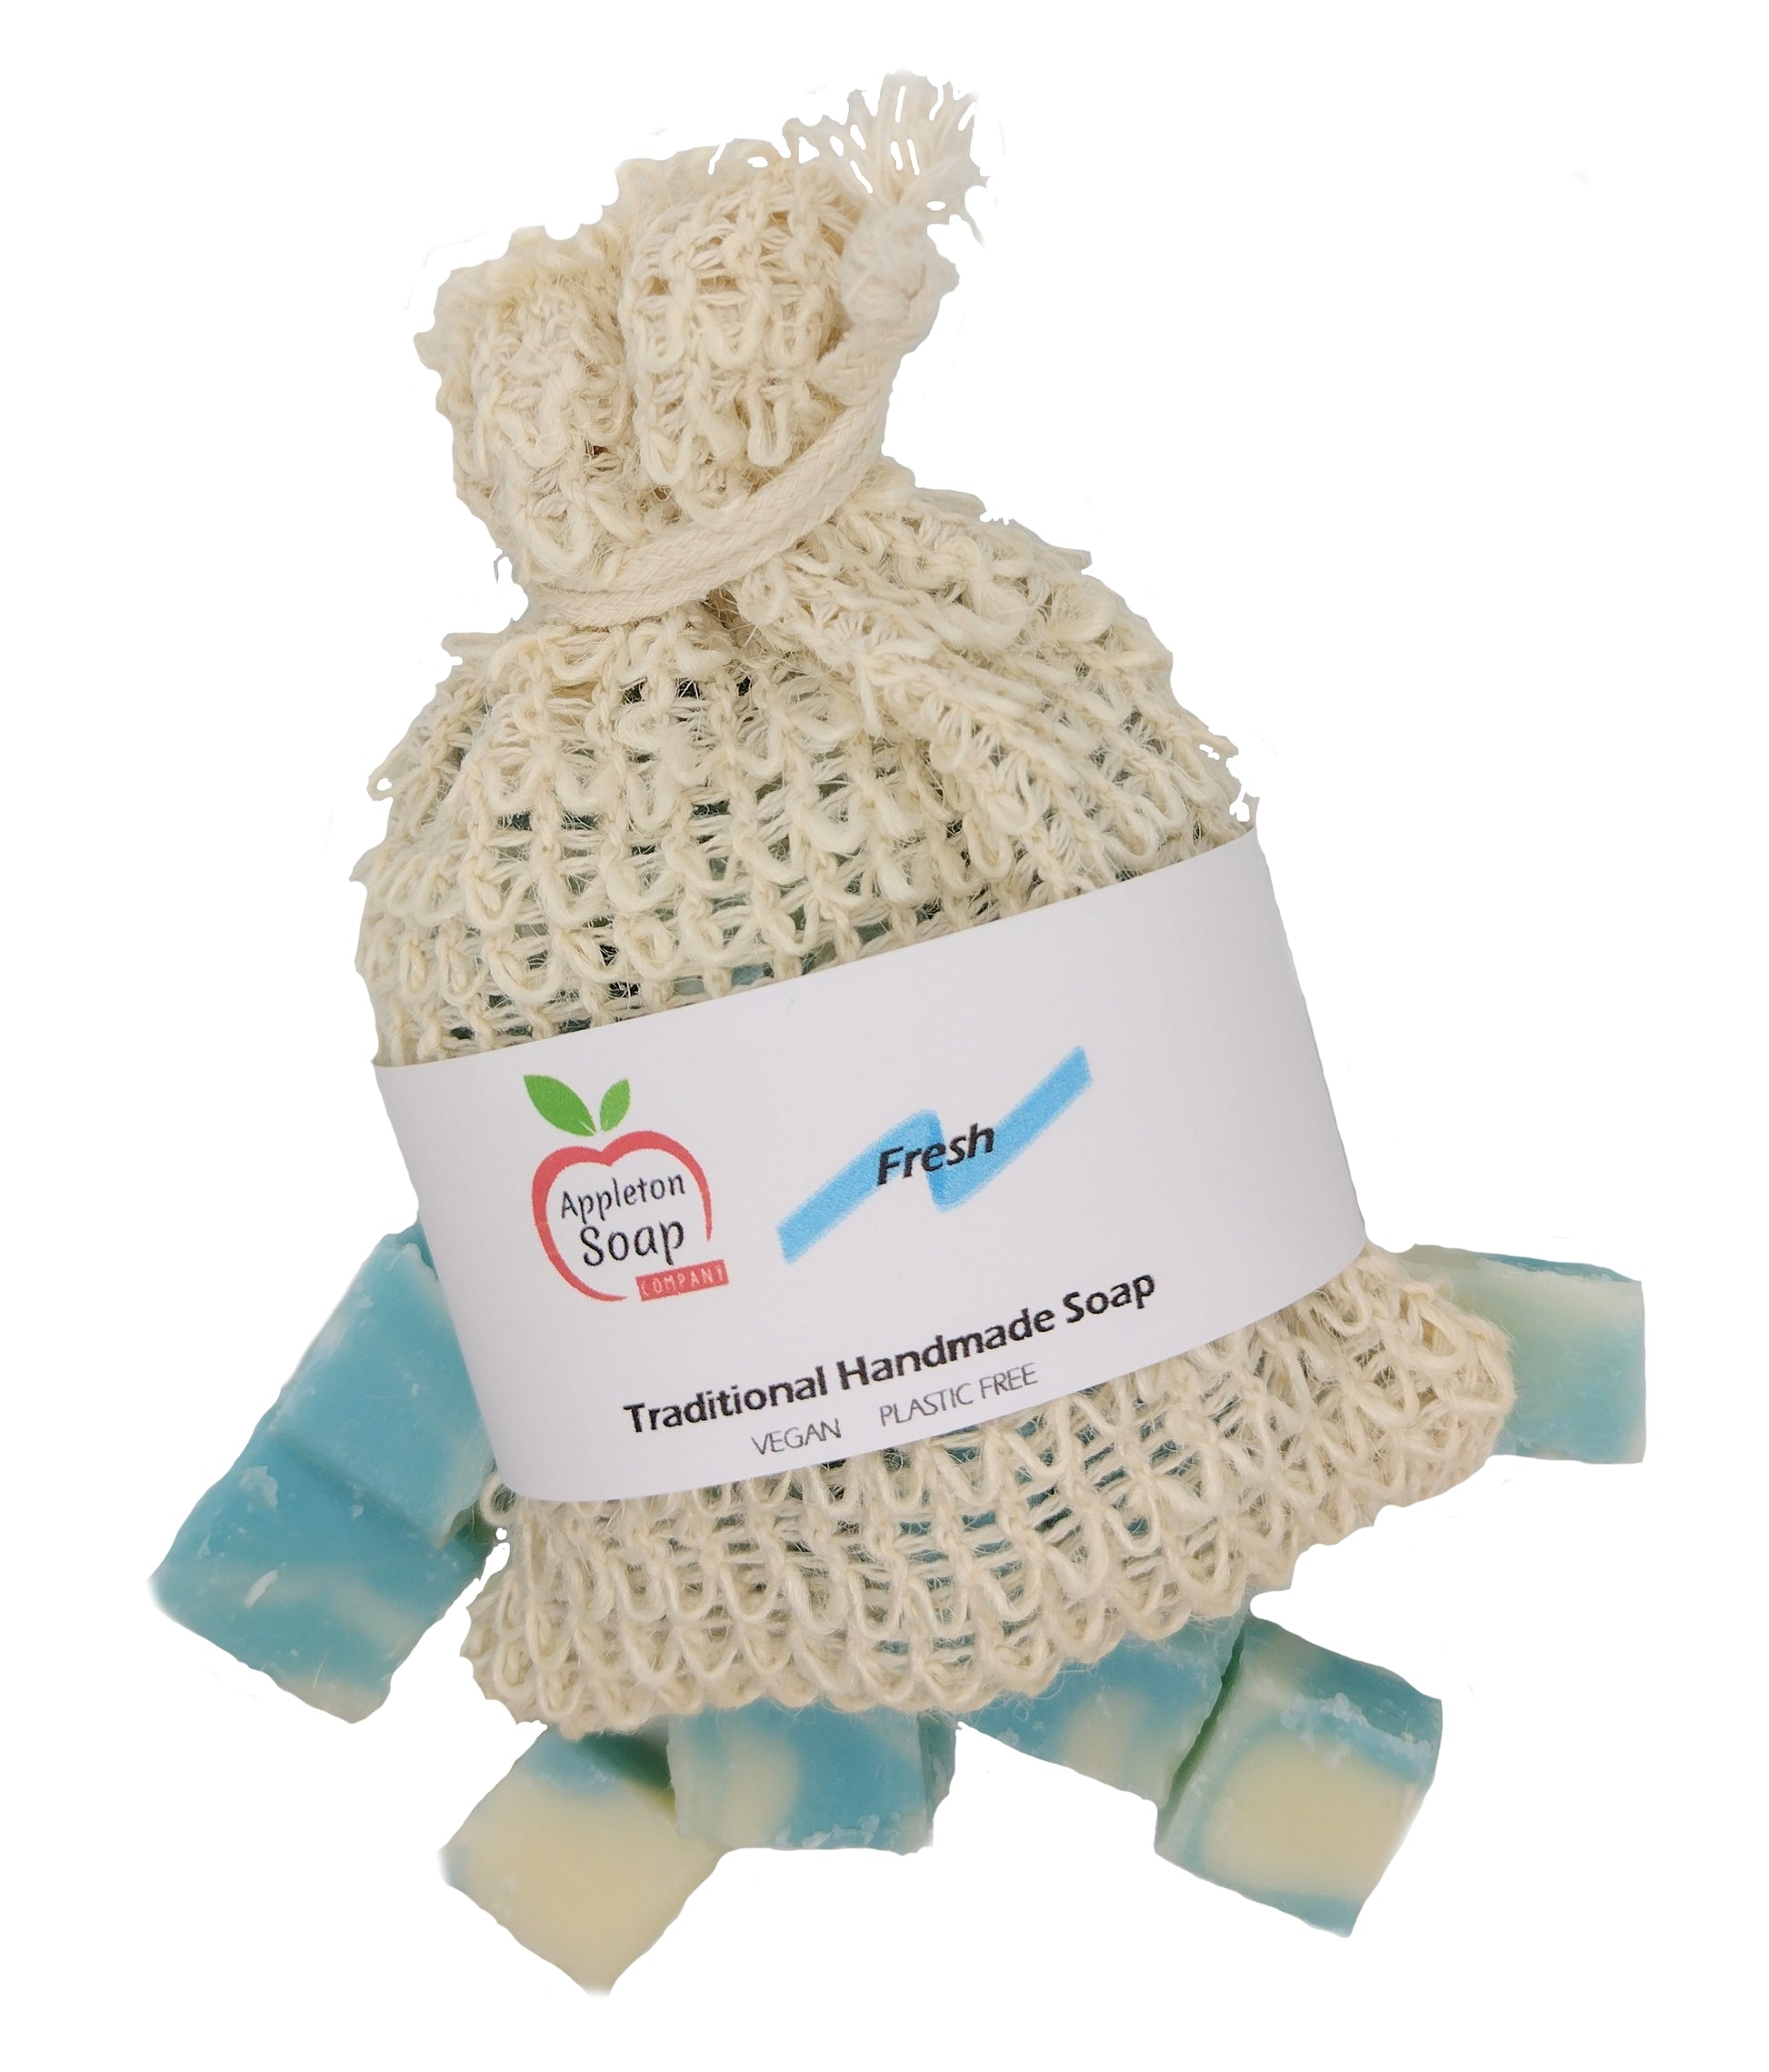 Fresh soap scrap sisal bag with white wrap around label sitting on pieces of fresh soap 